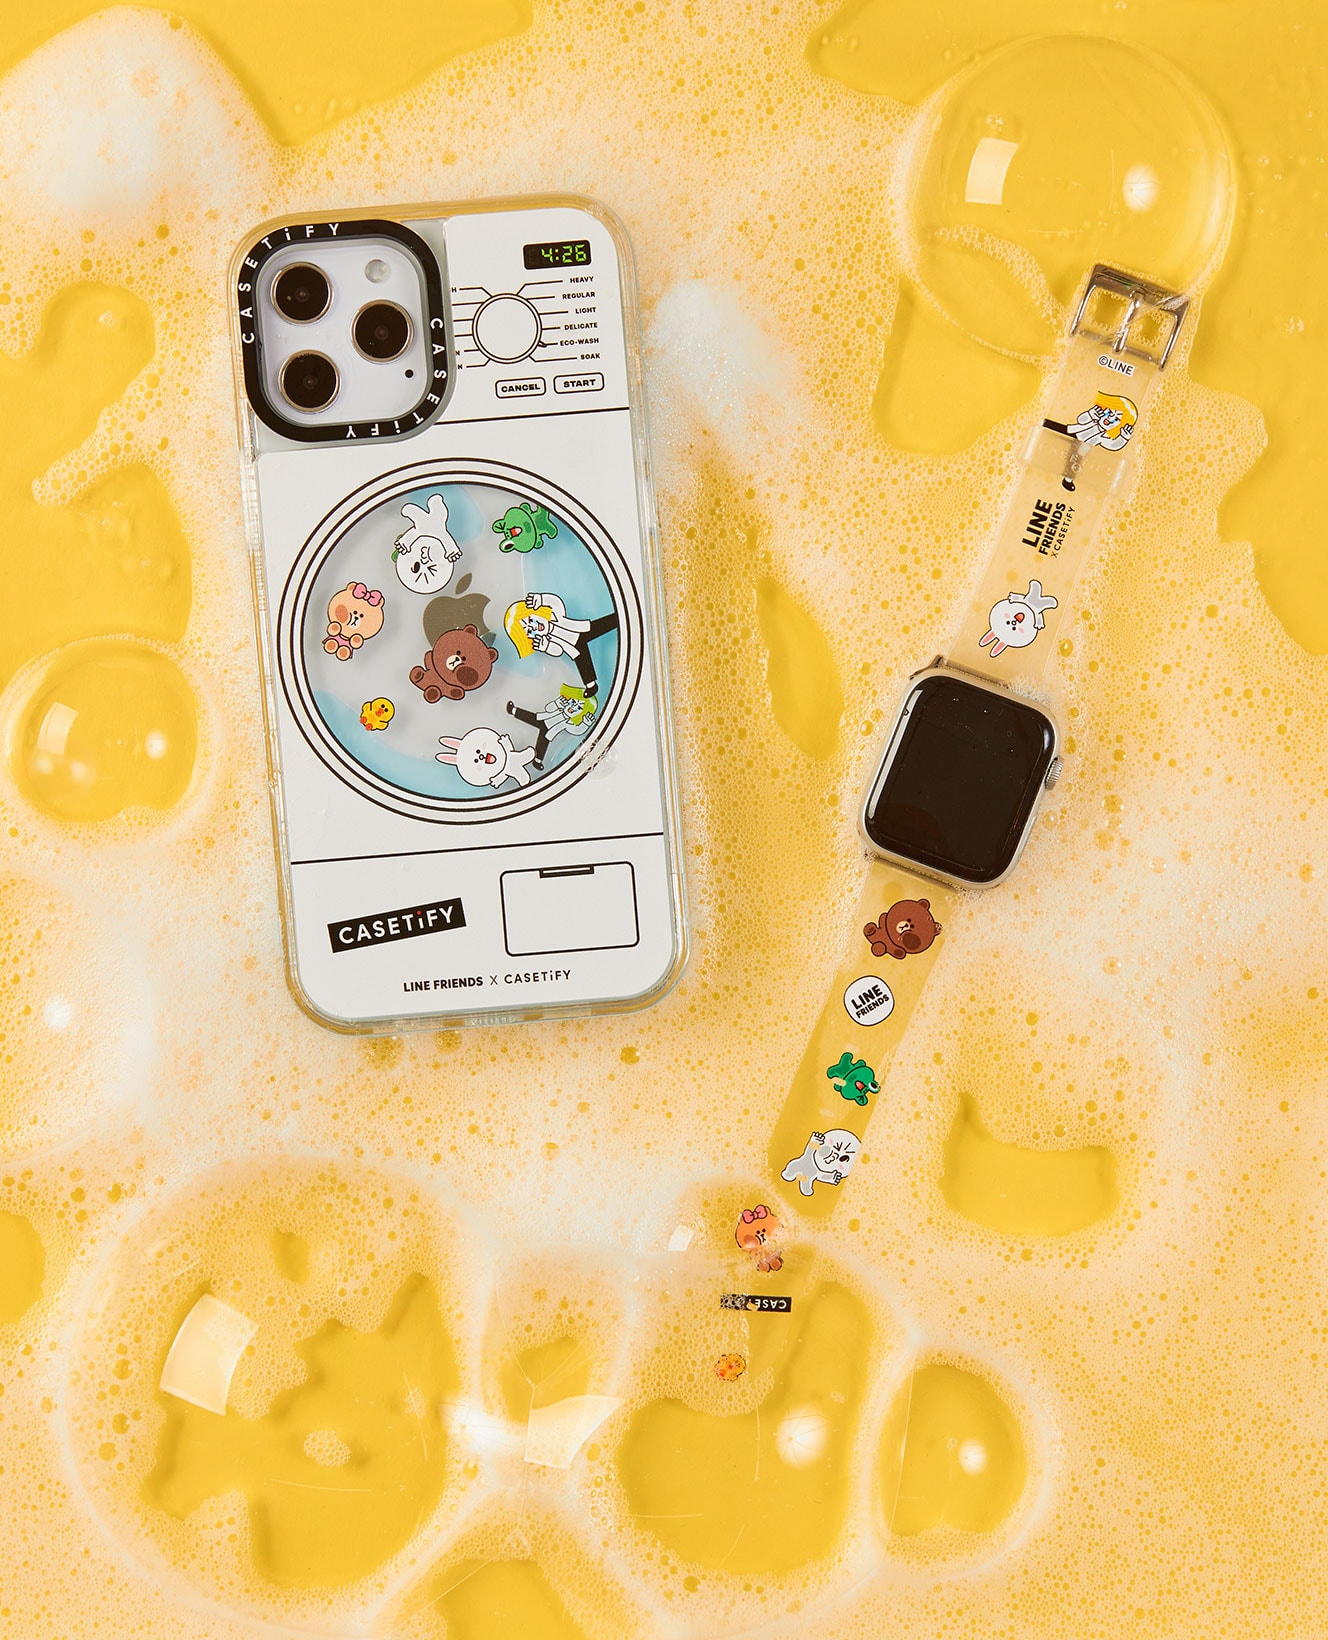 line friends casetify collaboration naver brown figures characters apple washing machine iphone case smart watch strap